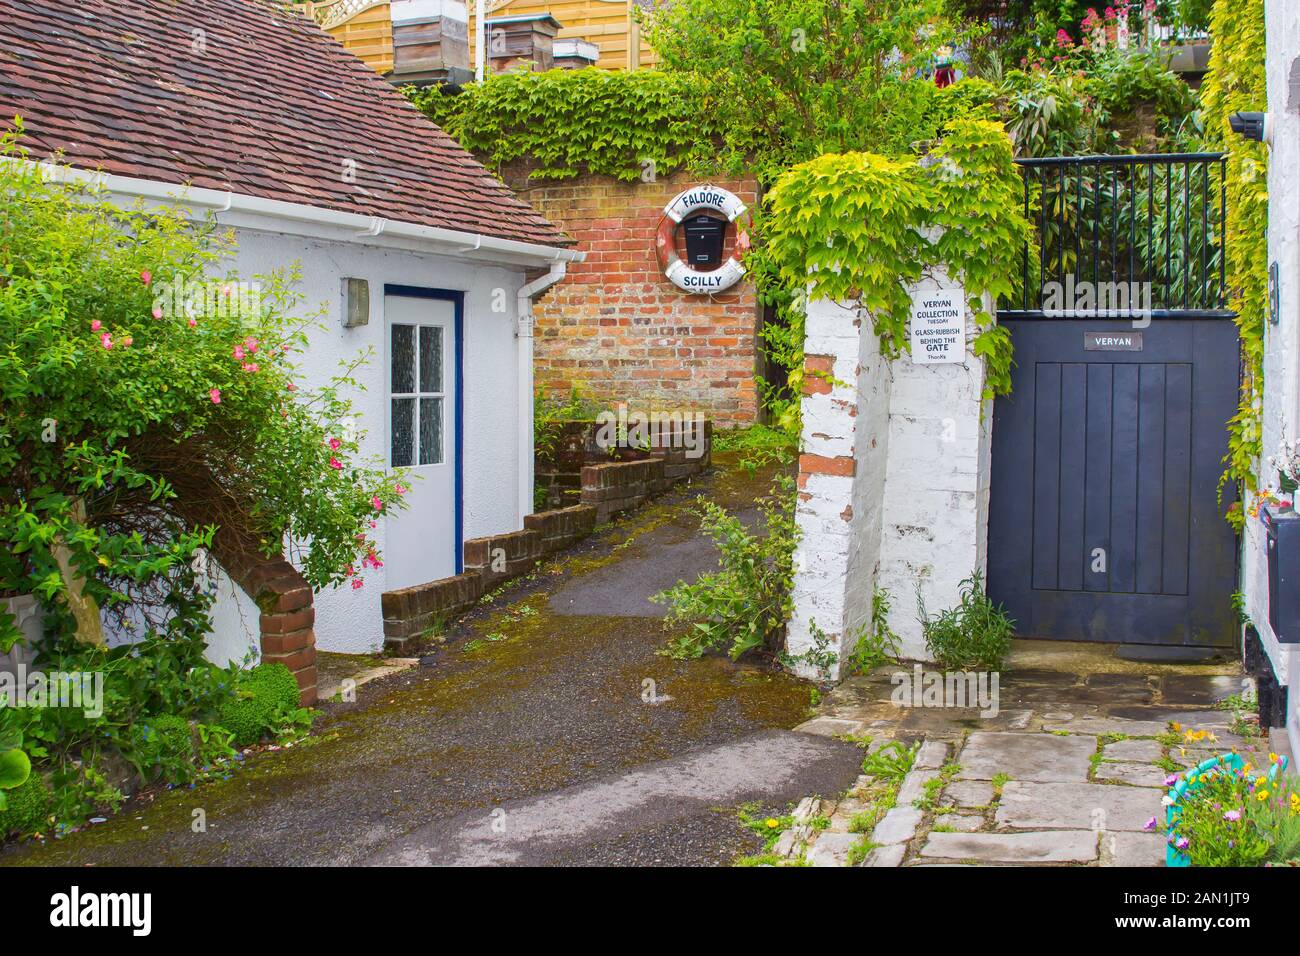 8 June 2017 A secluded corner with a cottage and lush garden growth in Lymington on the south coast of England in early June Stock Photo